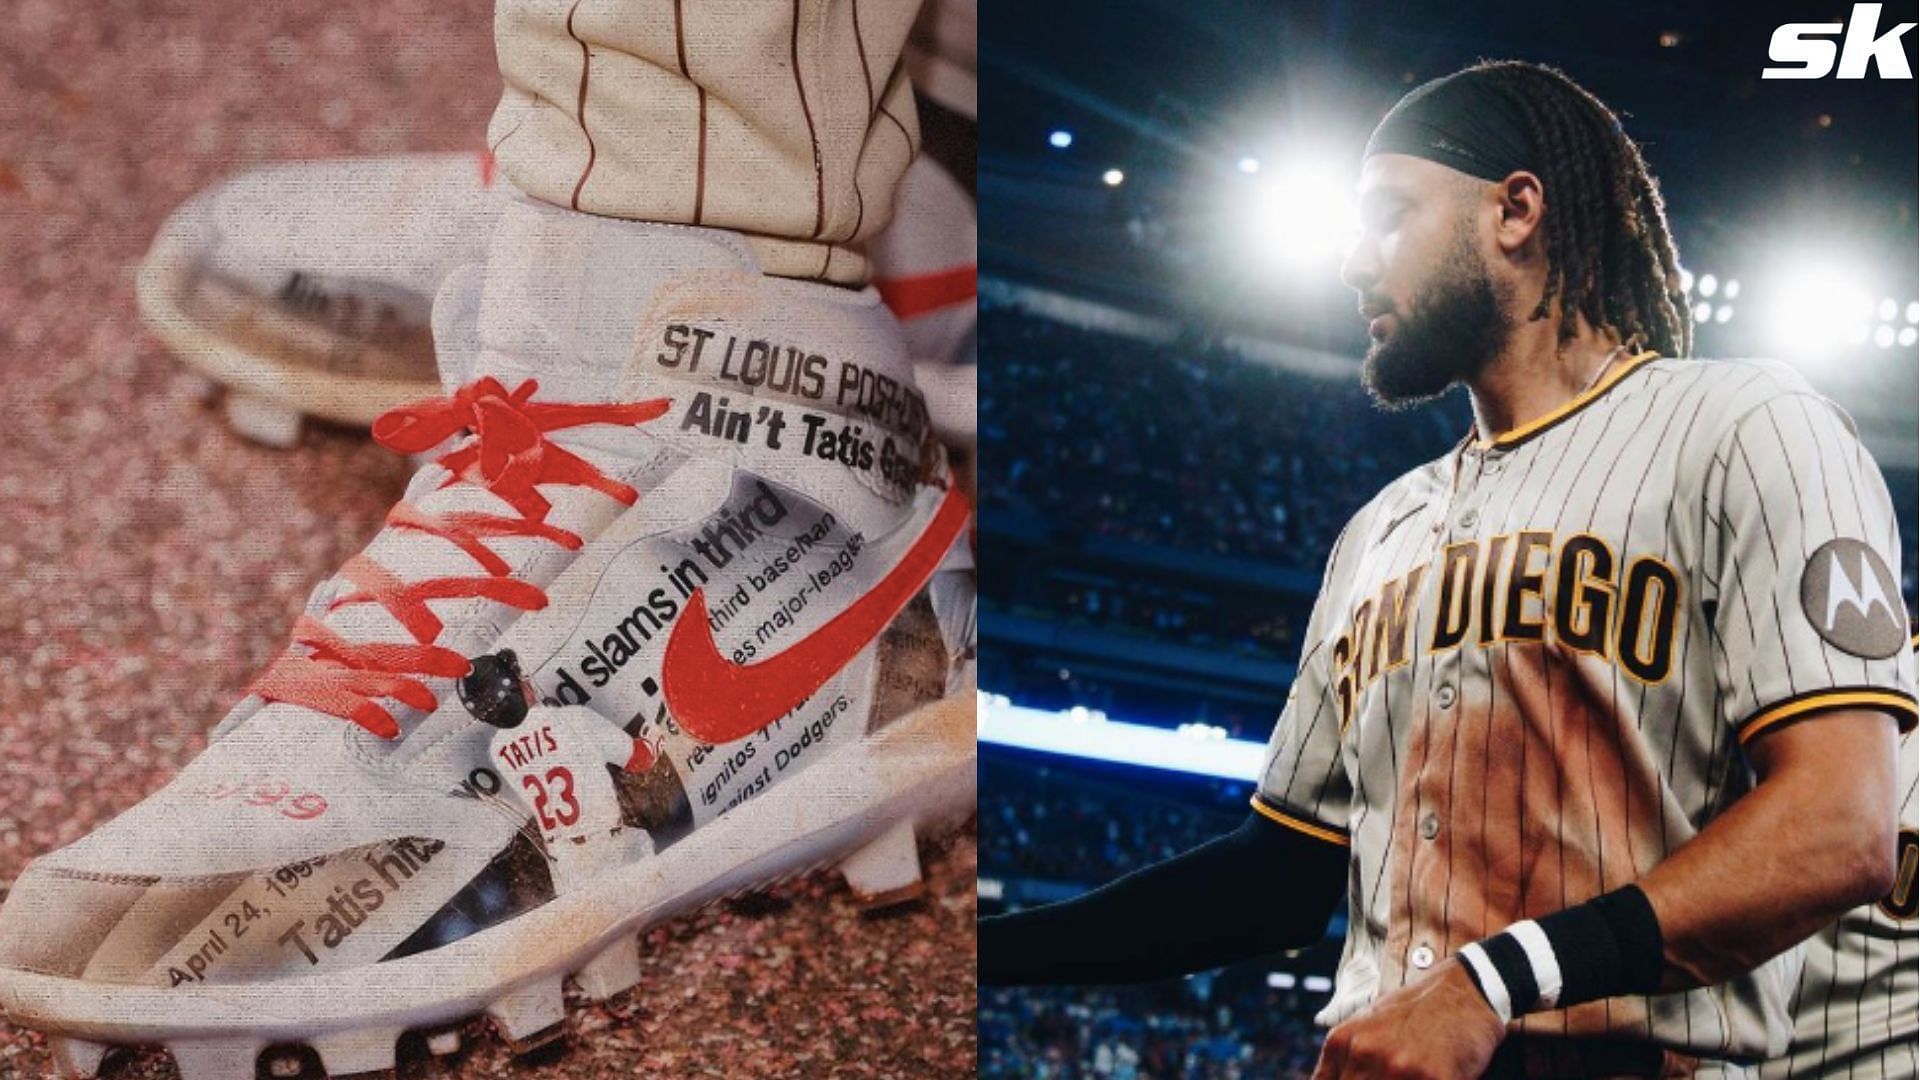 Does he have the best custom cleats in the league? 👀 #Tatis